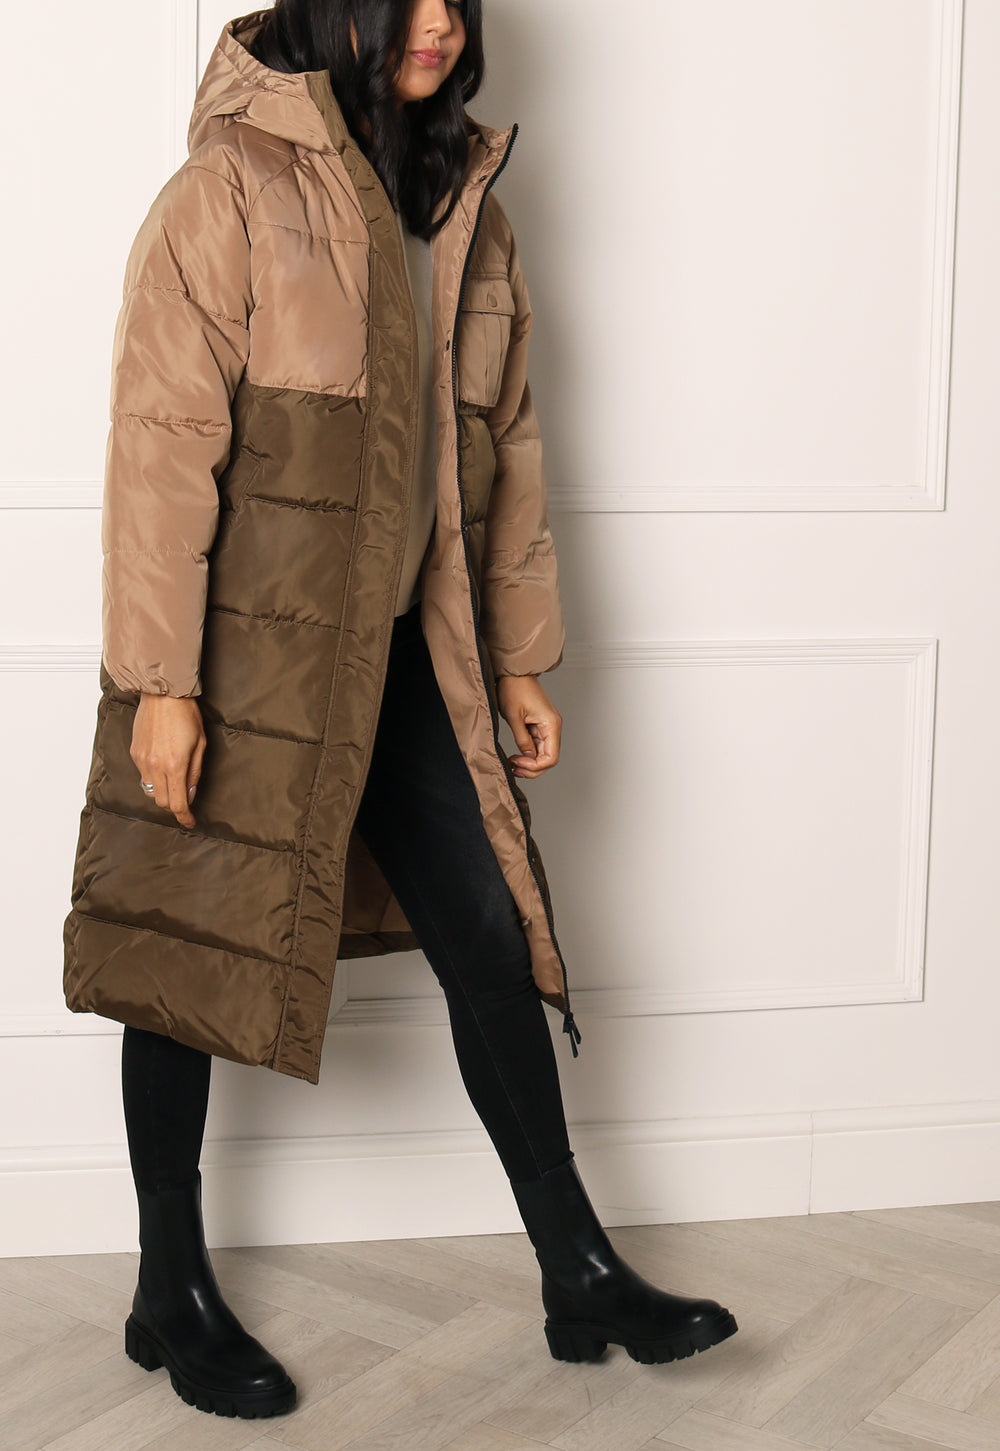 ONLY Becca Longline Midi Puffer Coat with Hood in Colour Block Khaki & Beige - One Nation Clothing